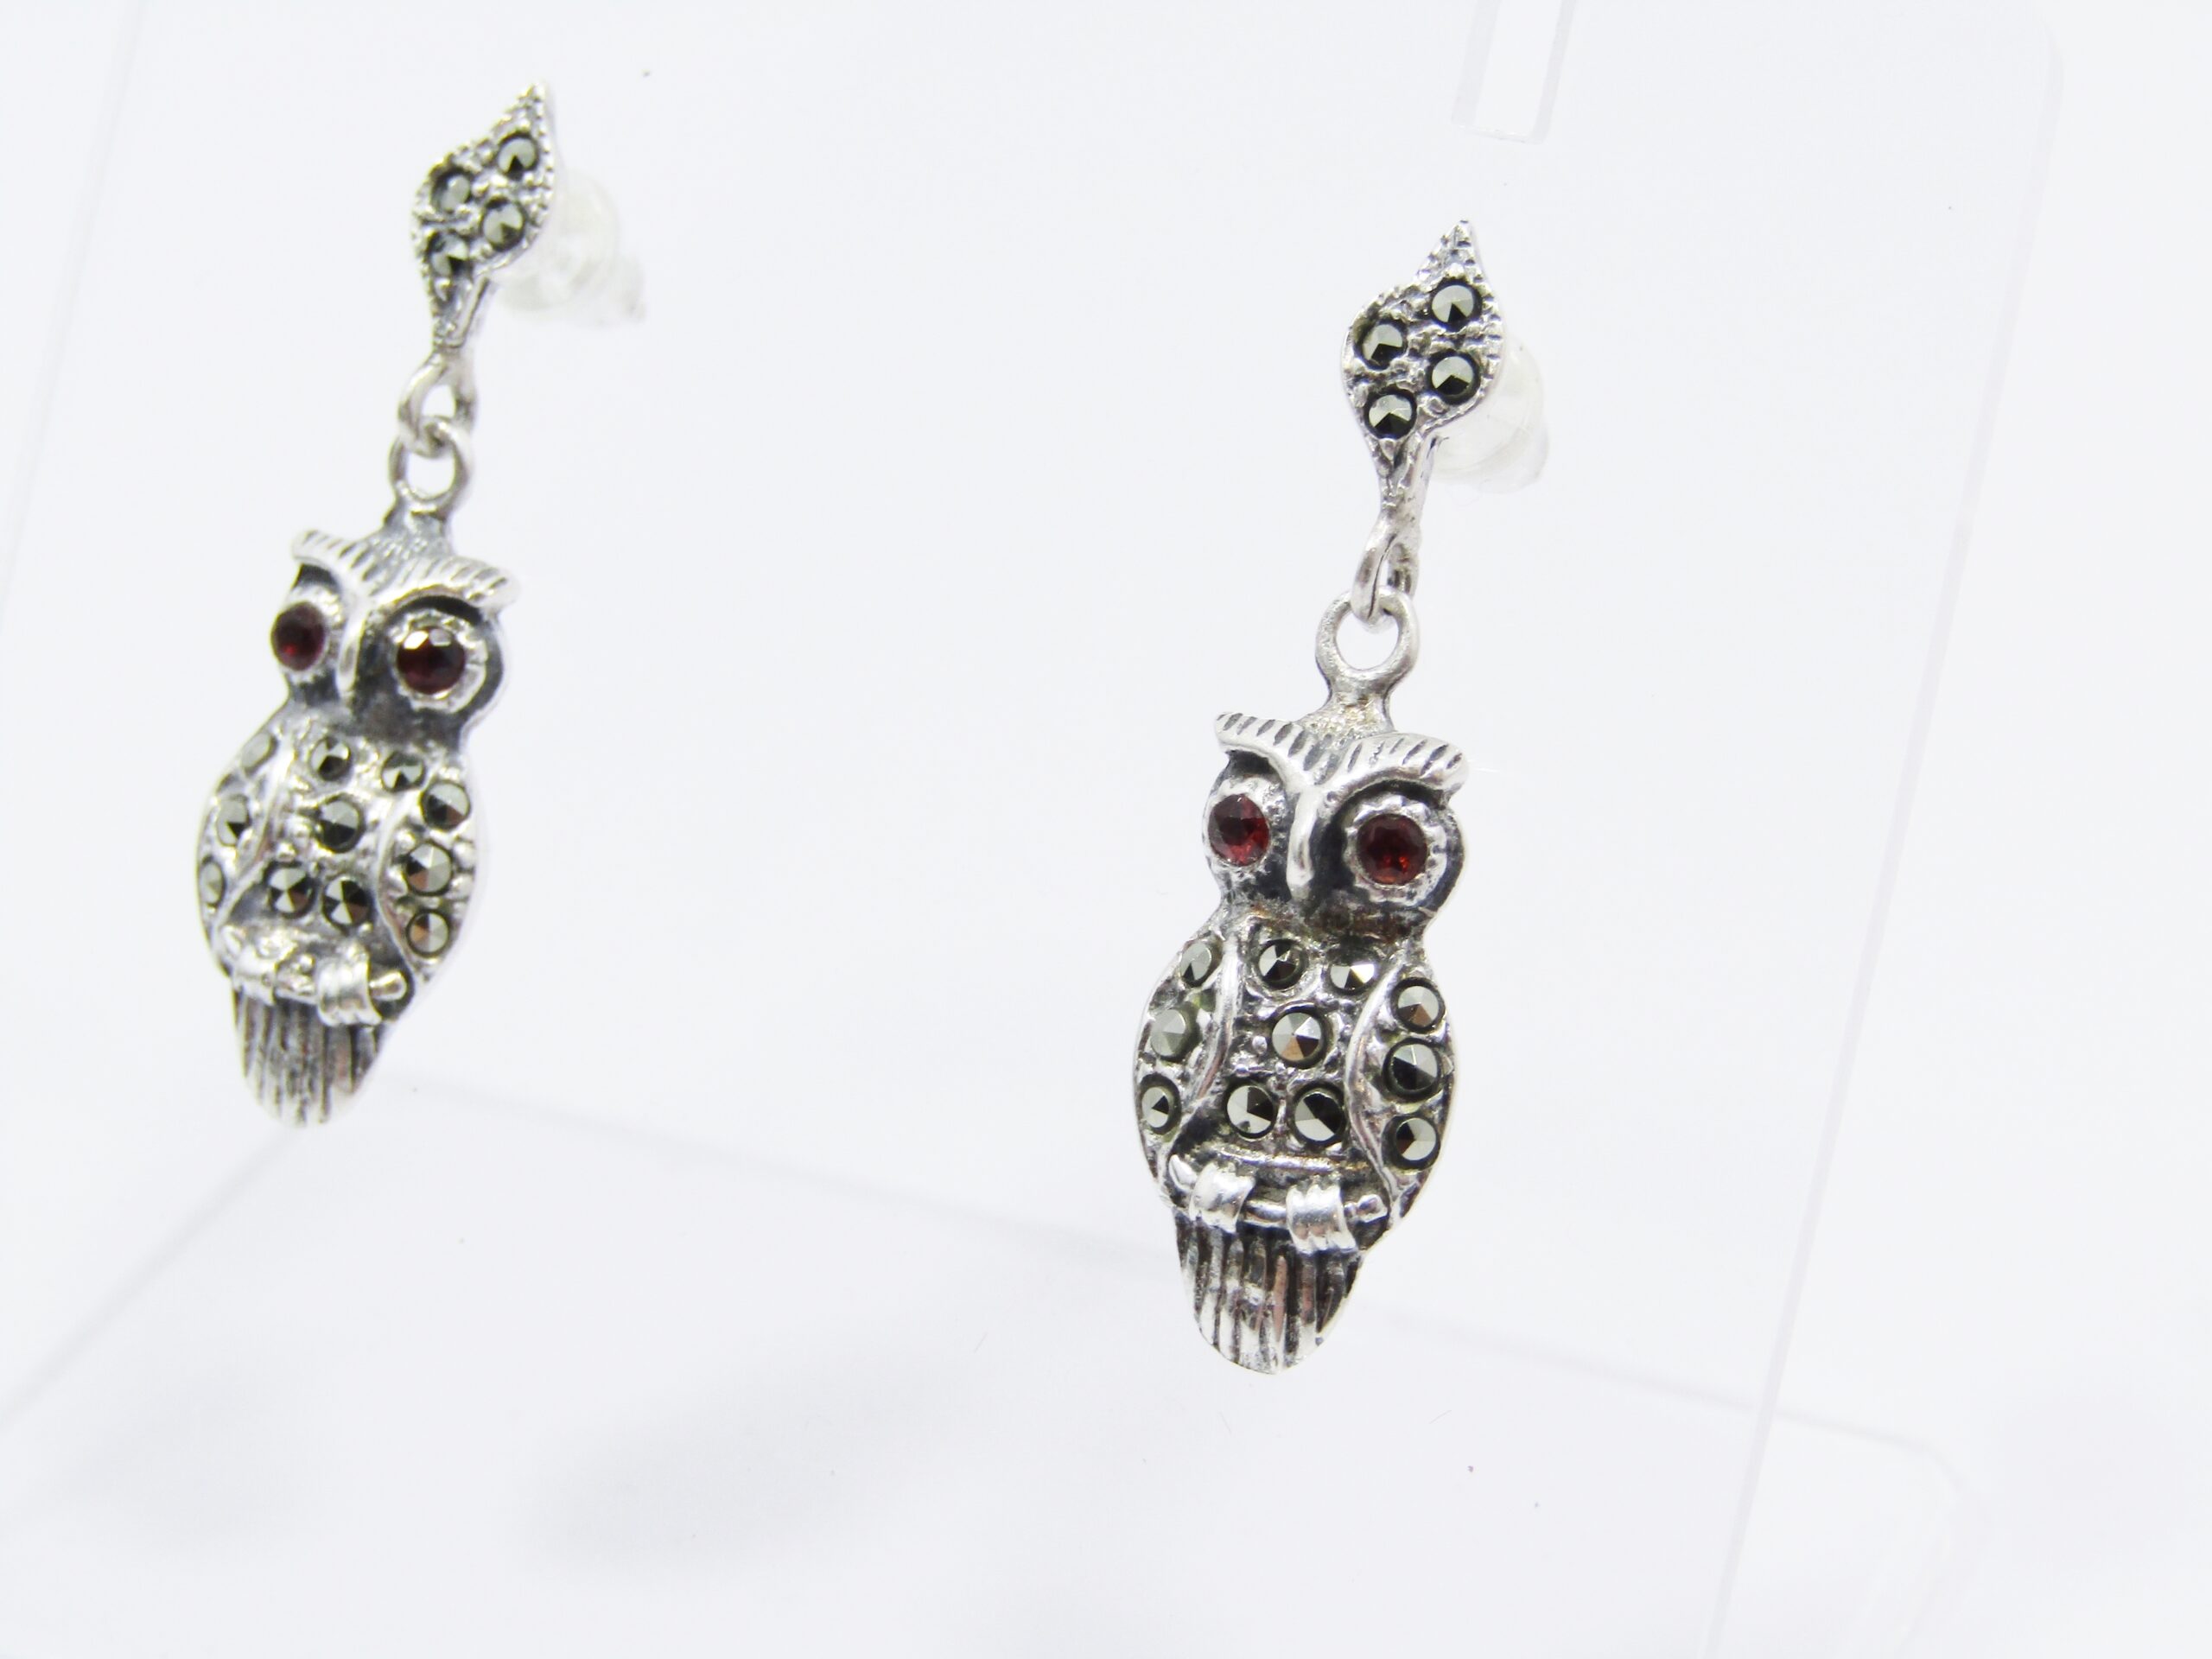 A Lovely Pair of Owl Marcasite Dangling Earrings in Sterling Silver.